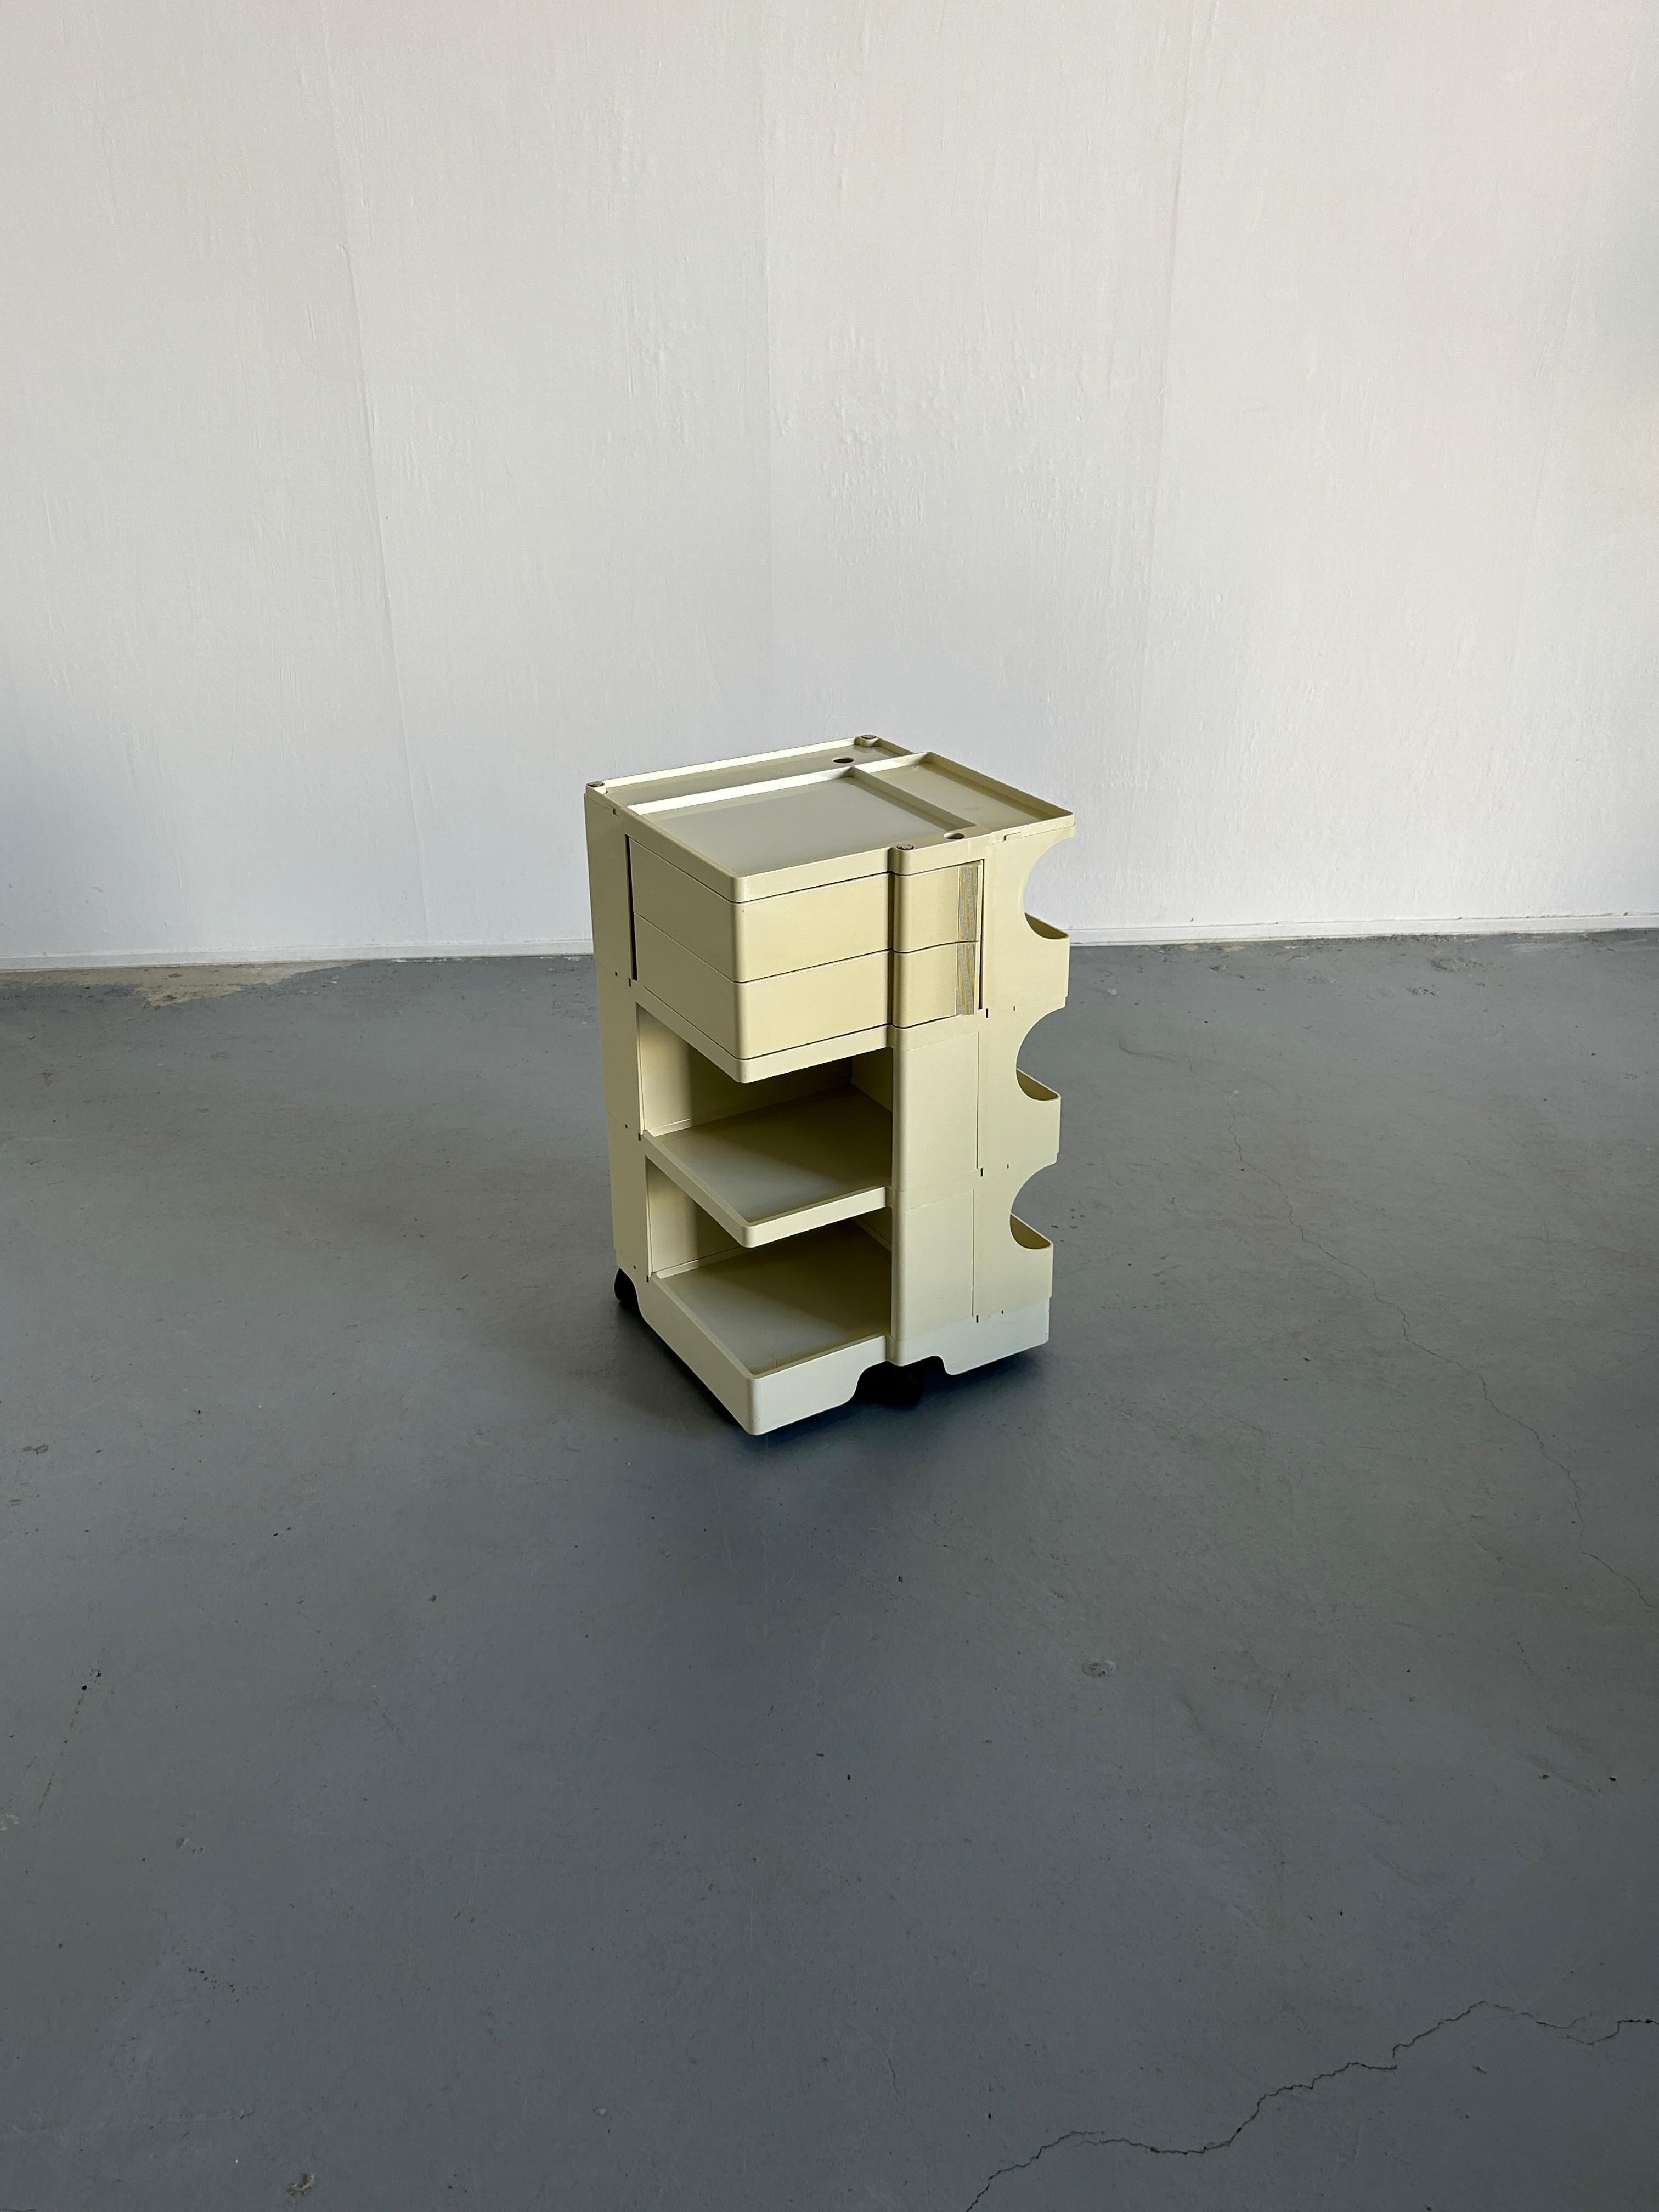 An early production 1970s vintage white edition 'Boby' trolley with three swivel drawers, designed by Joe Colombo for Bieffeplast Italy in 1970s.

Overall in good vintage condition with expected signs of age and use, as depicted in the photos.
One